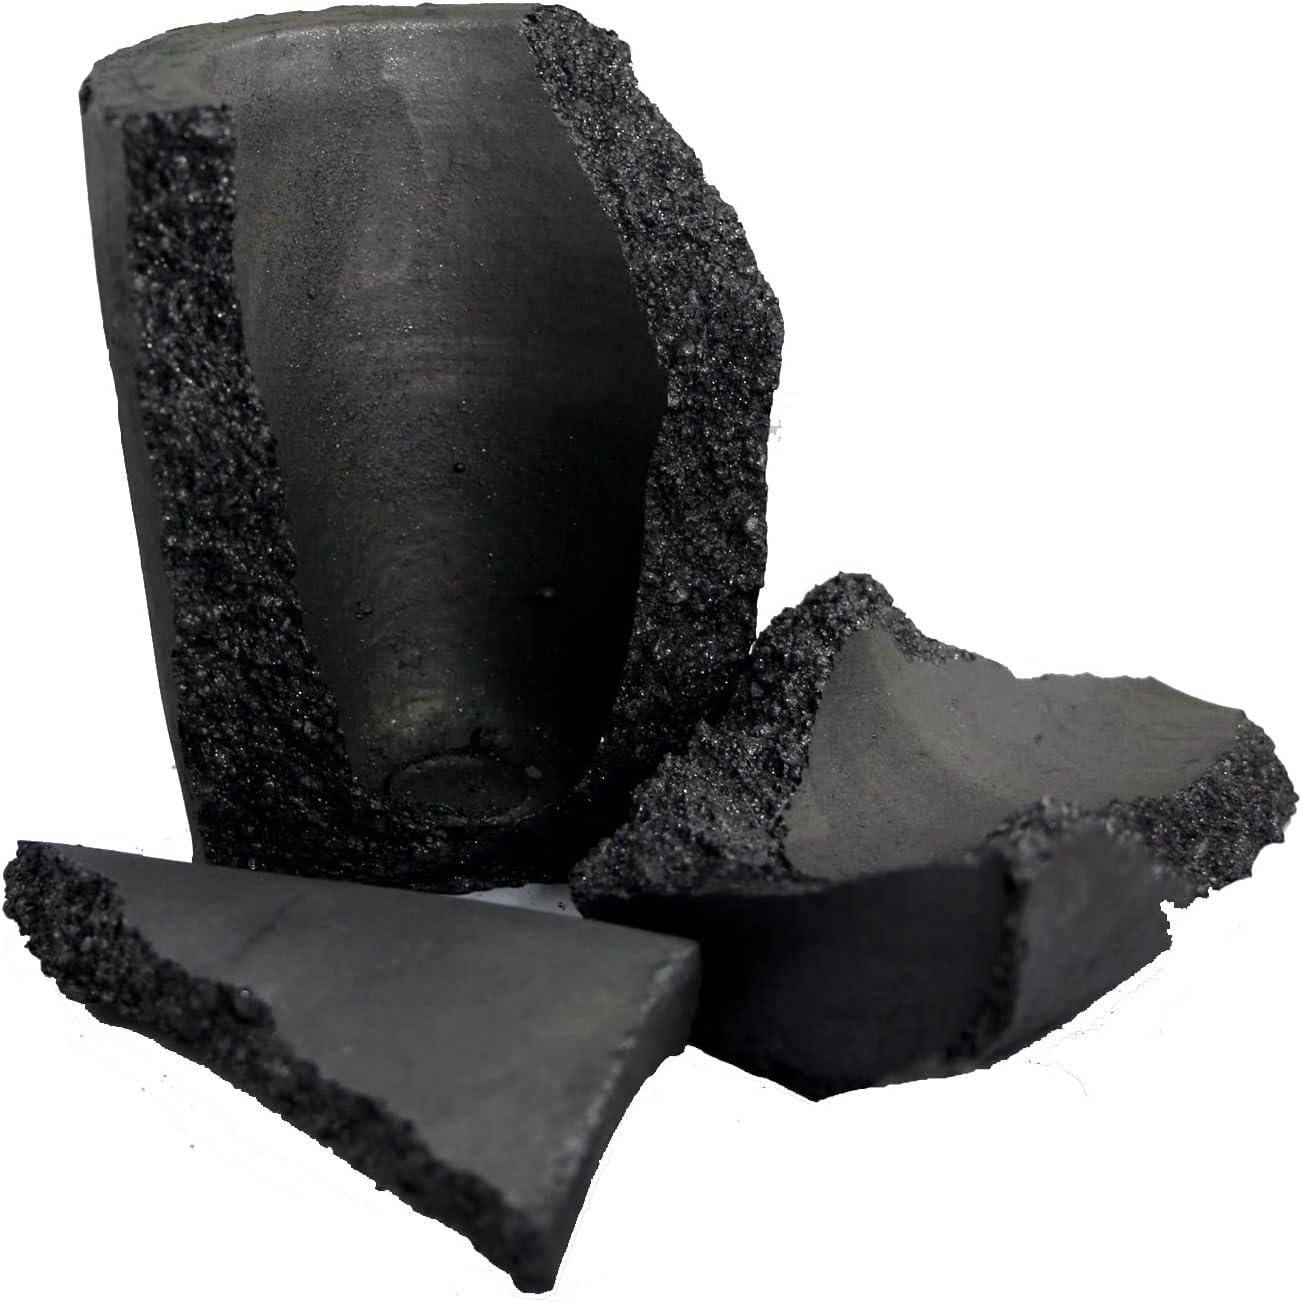 8KG Foundry Clay Graphite Crucibles,Crucibles for Melting Metal